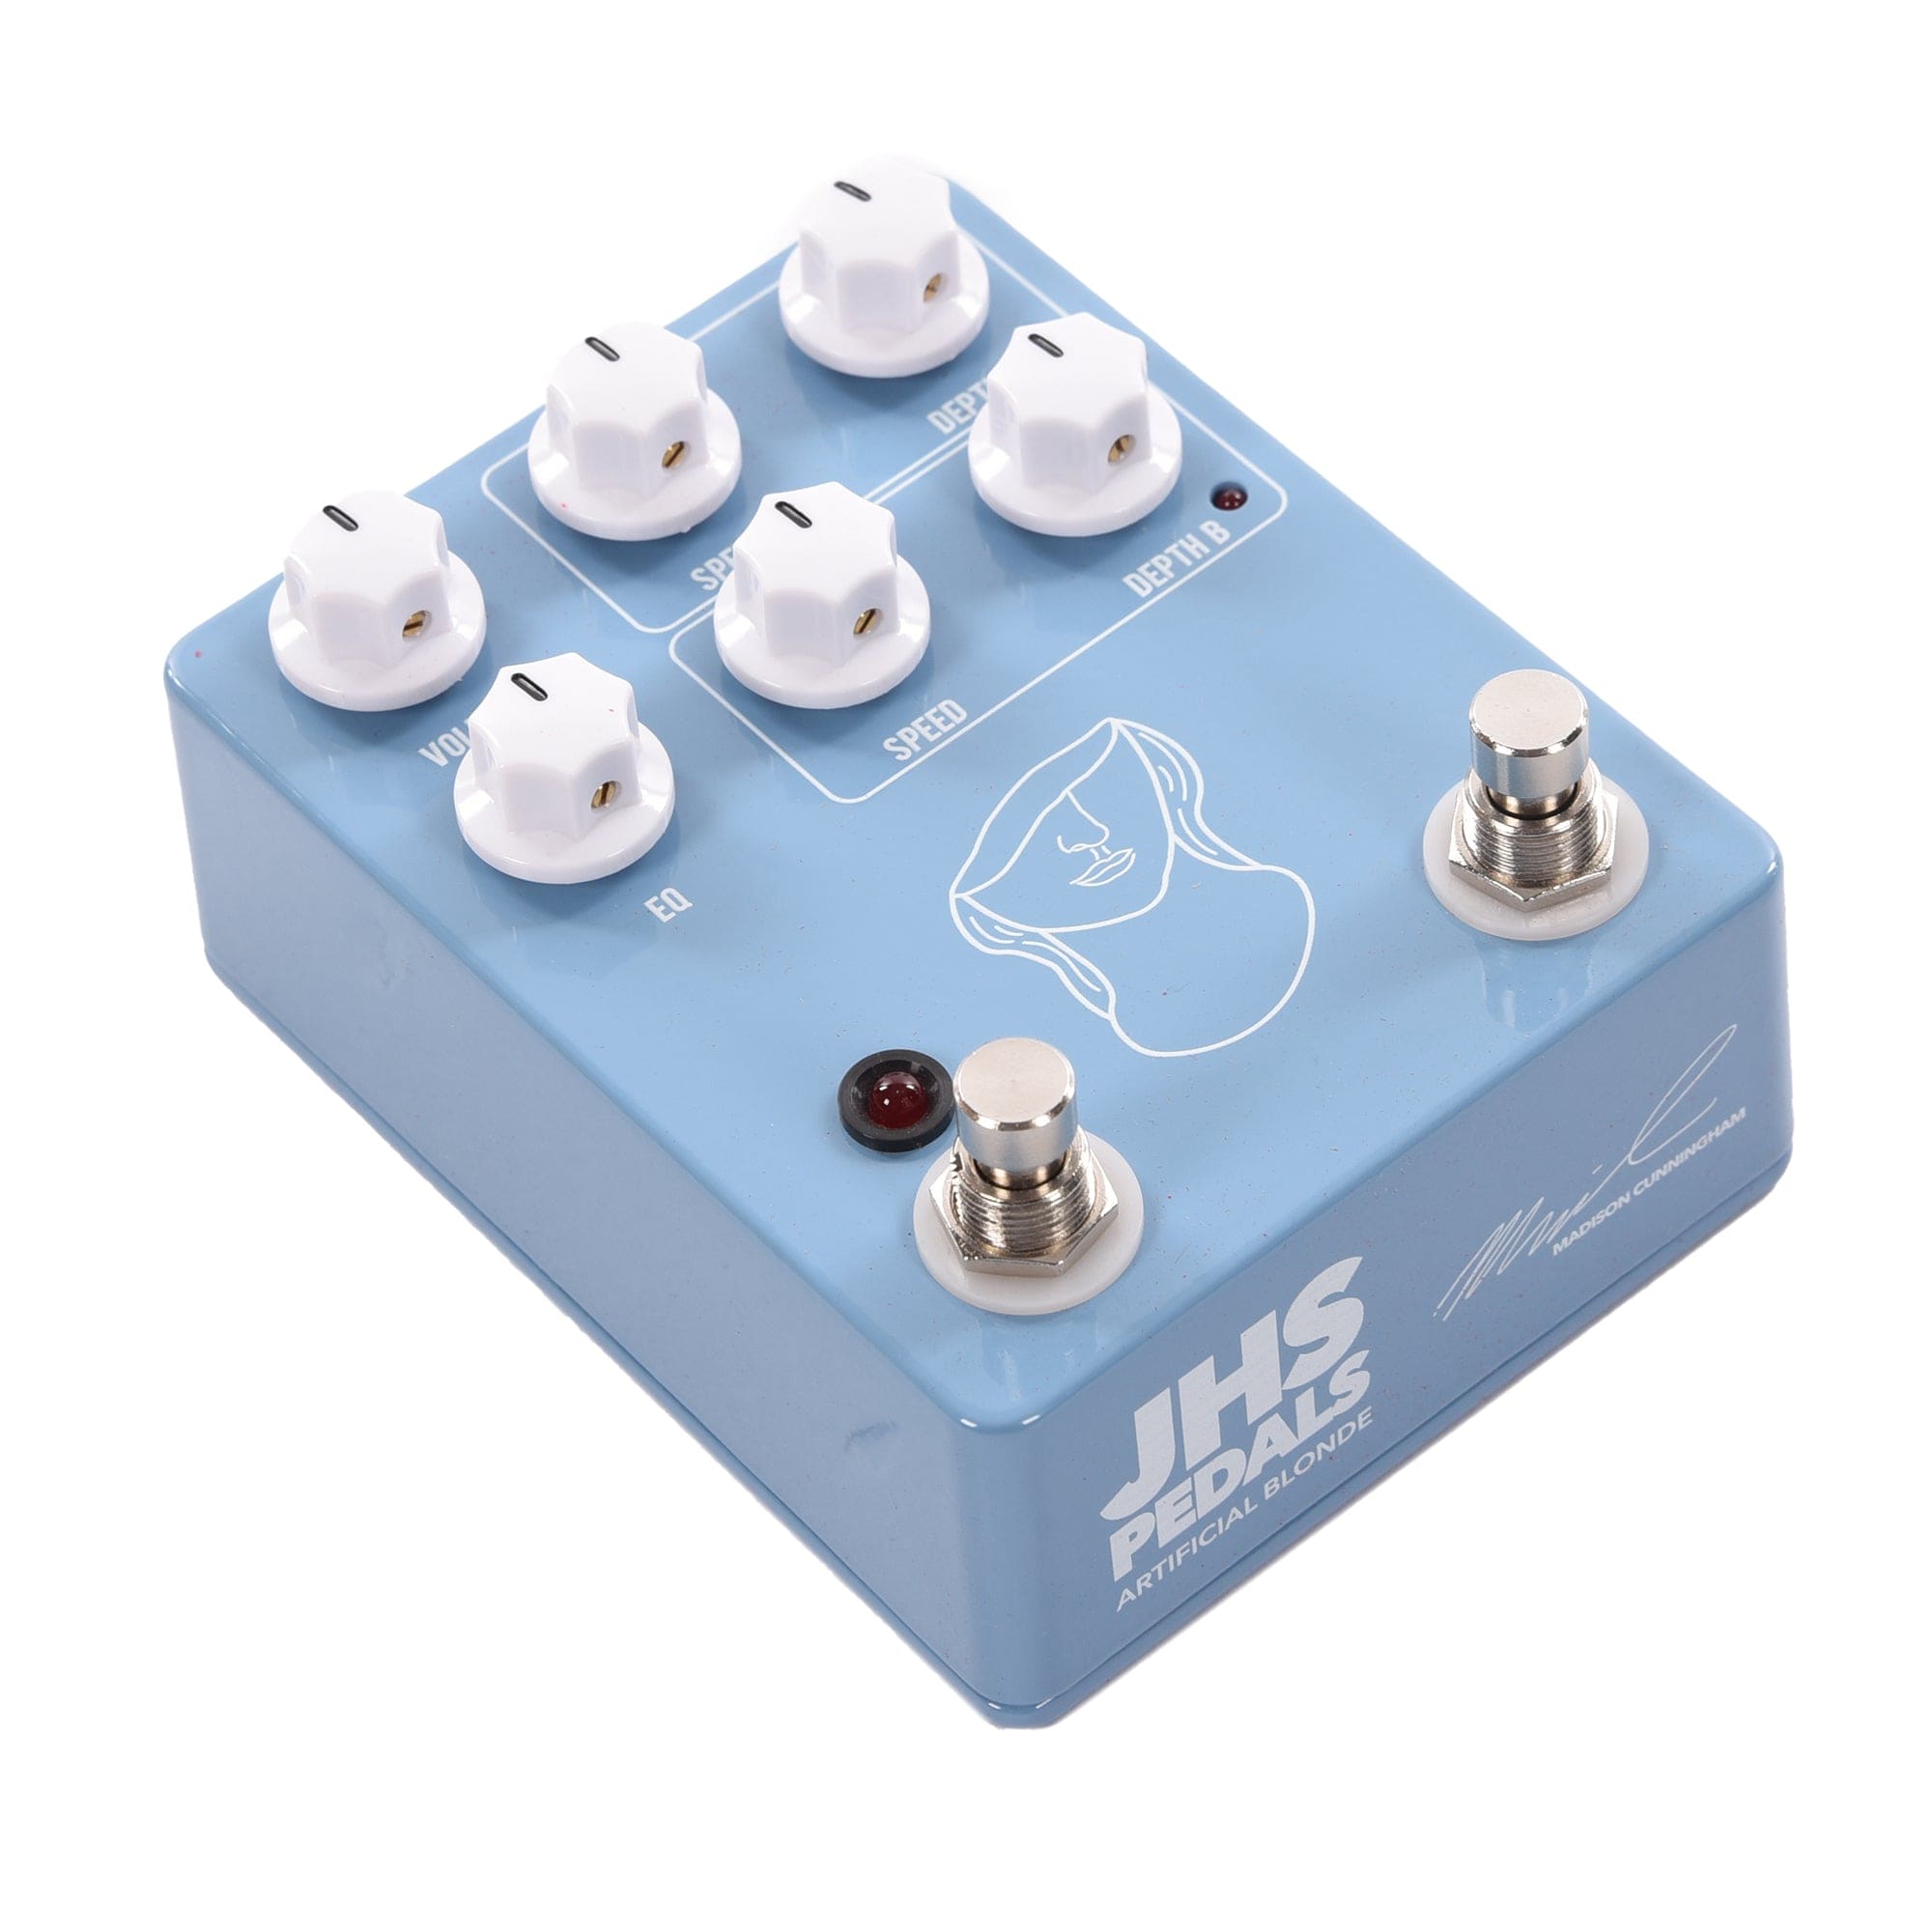 JHS Artificial Blonde Madison Cunningham Artist Signature Pedal Effects and Pedals / Tremolo